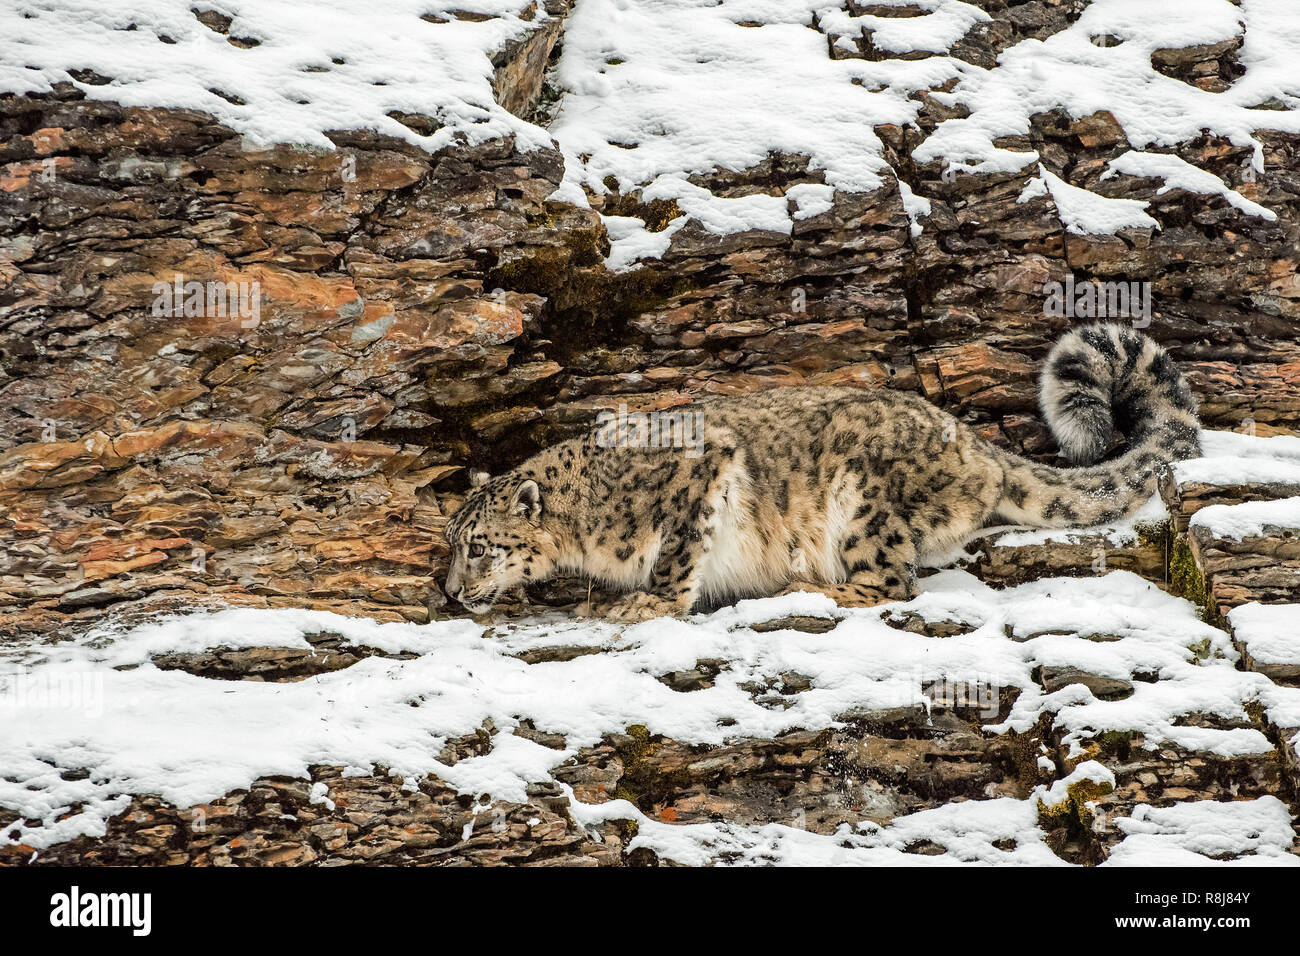 Snow Leopard Crouched on a Rocky Cliffside in the Winter in the Snow Stock Photo